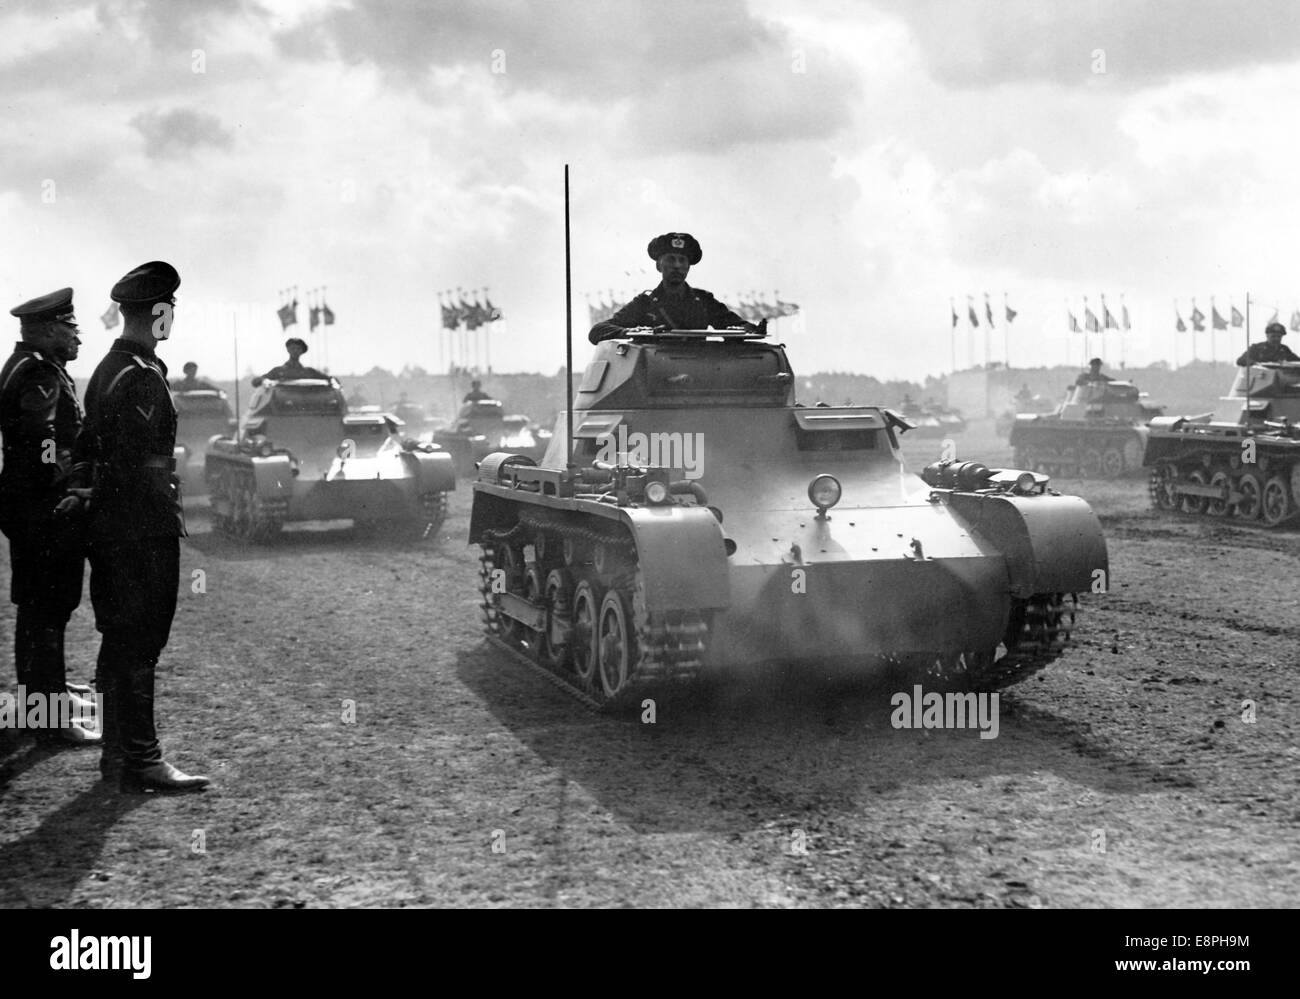 Nuremberg Rally 1937 in Nuremberg, Germany - Nazi party rally grounds - Demonstration by the Nazi armed forces (Wehrmacht) on Zeppelin Field, here: a tank regiment. (Flaws in quality due to the historic picture copy) Fotoarchiv für Zeitgeschichtee - NO WIRE SERVICE - Stock Photo